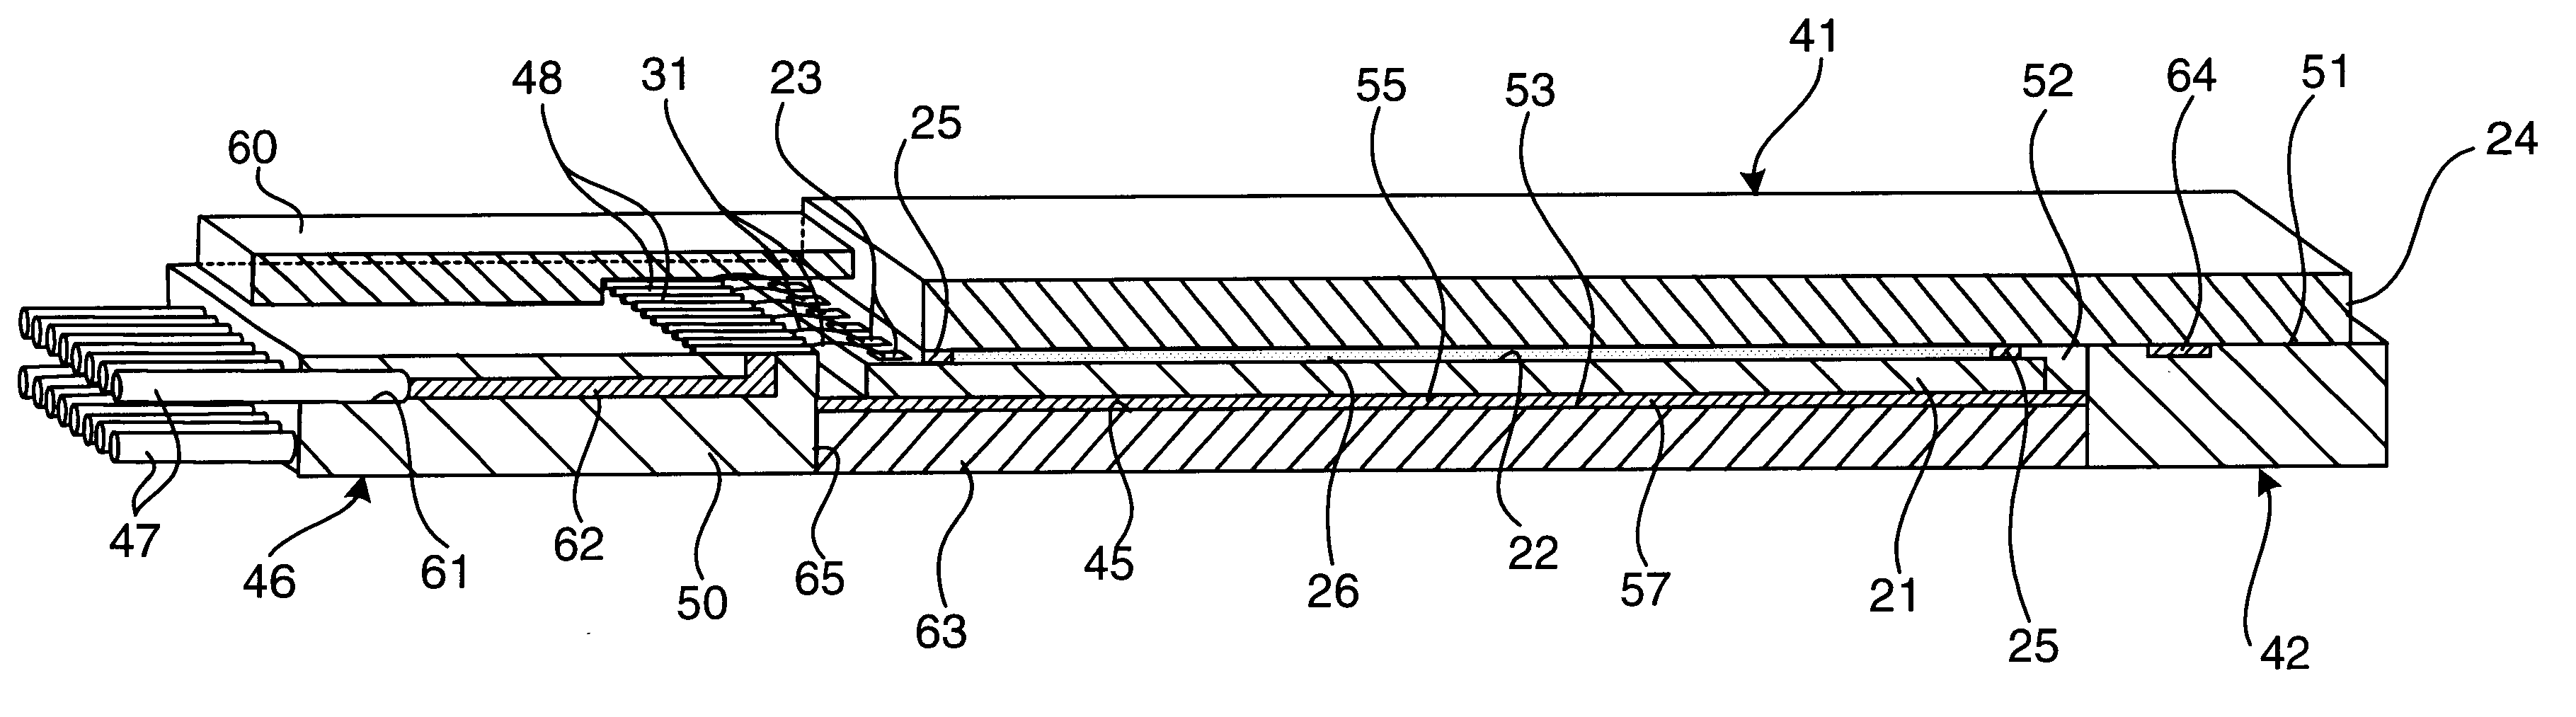 Stress-free socketed optical display package with die non-rigidly attached to containment structure